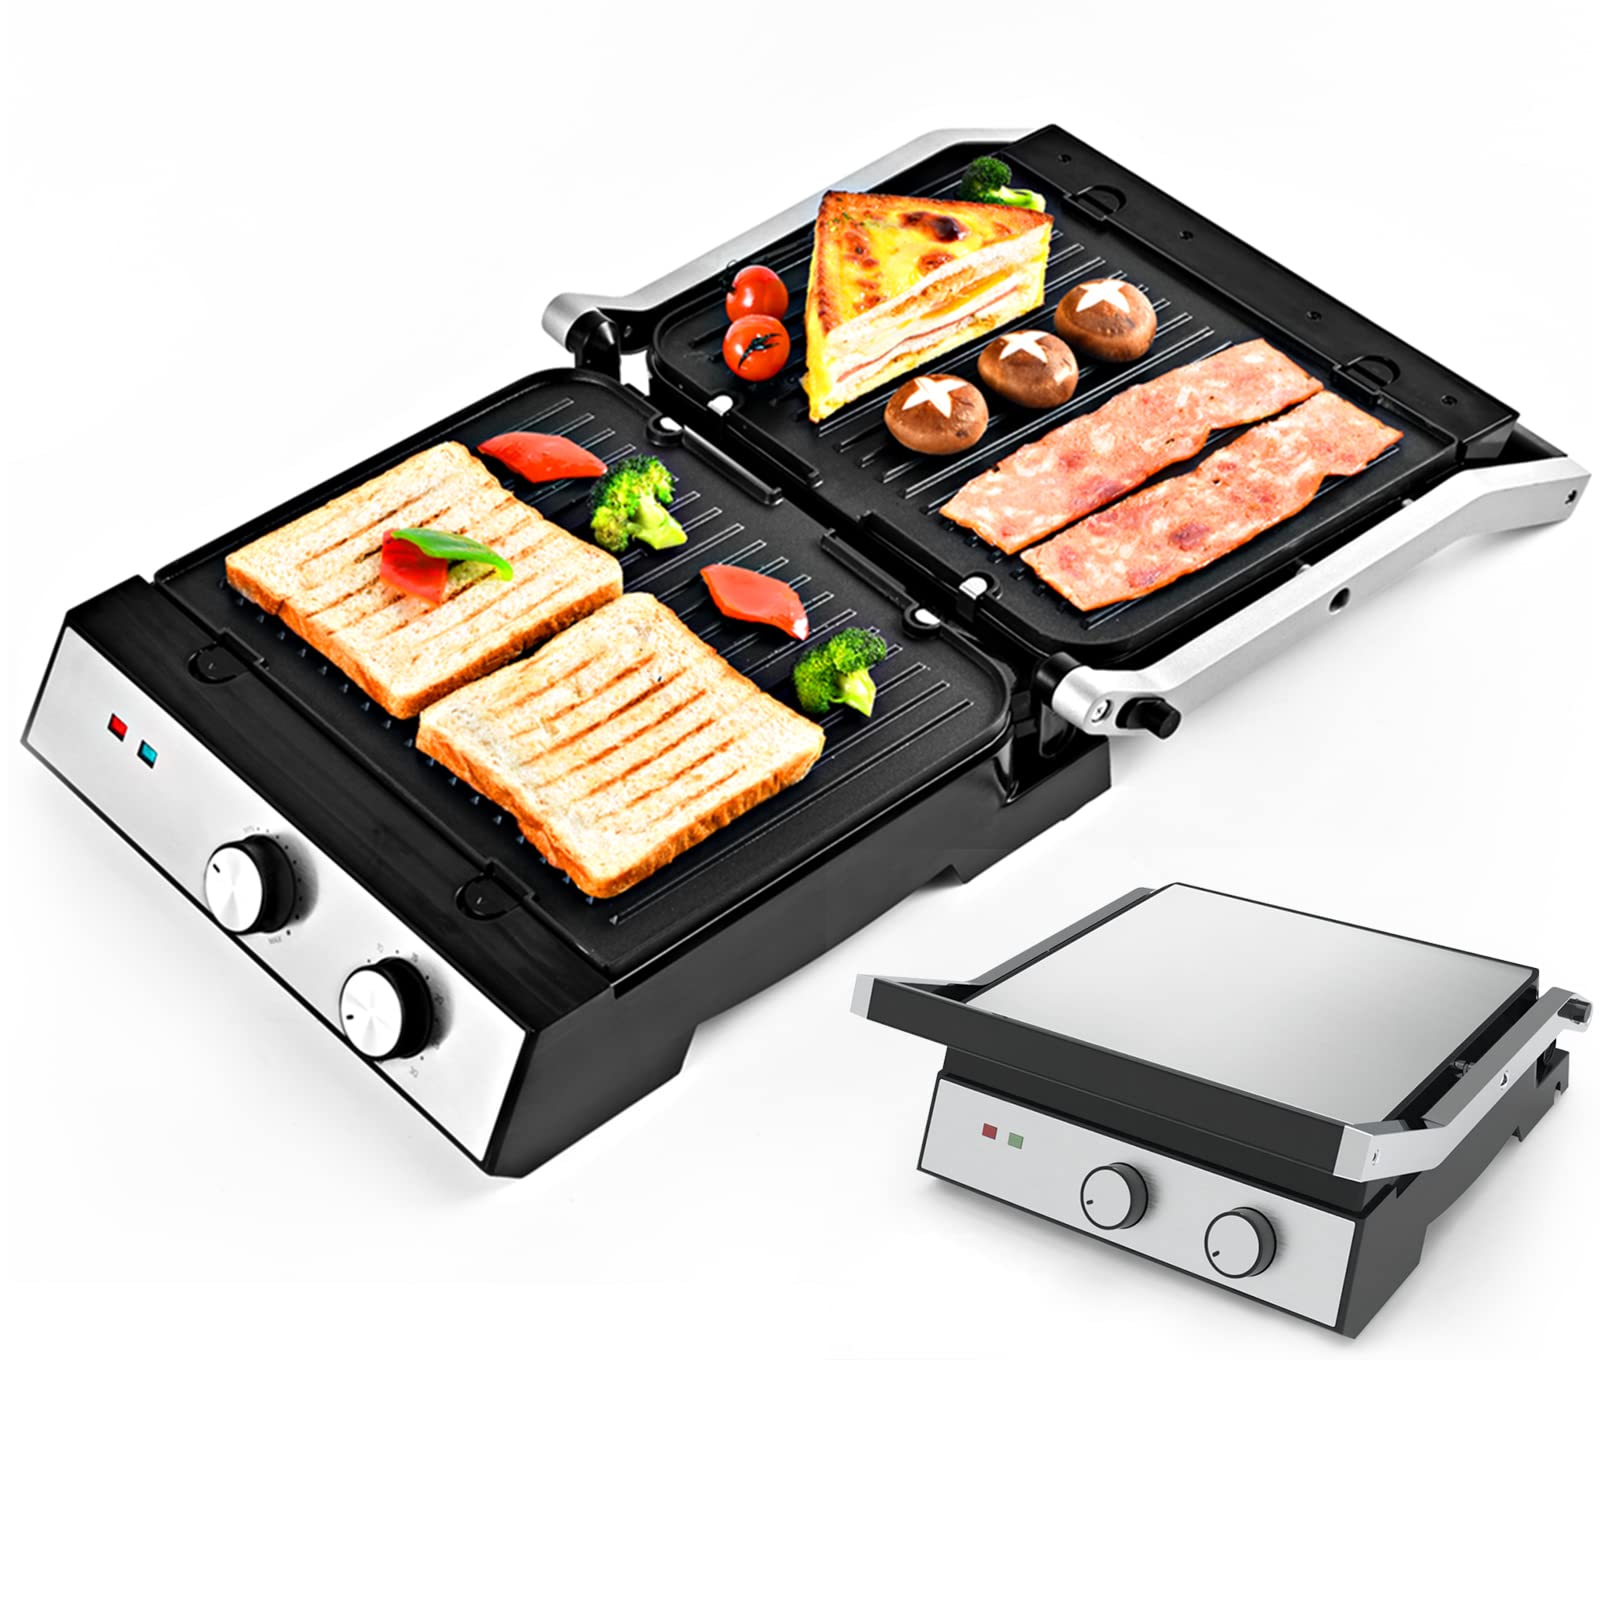 FELAYZA Smokeless Indoor Electric Grill & Panini Press, 8-Serving, Nonstick Removable Plate, Temp & Time Adjustable, Indoor Table Aluminum Grill with Removable Drip Tray for BBQ, Sandwich, Pancake etc